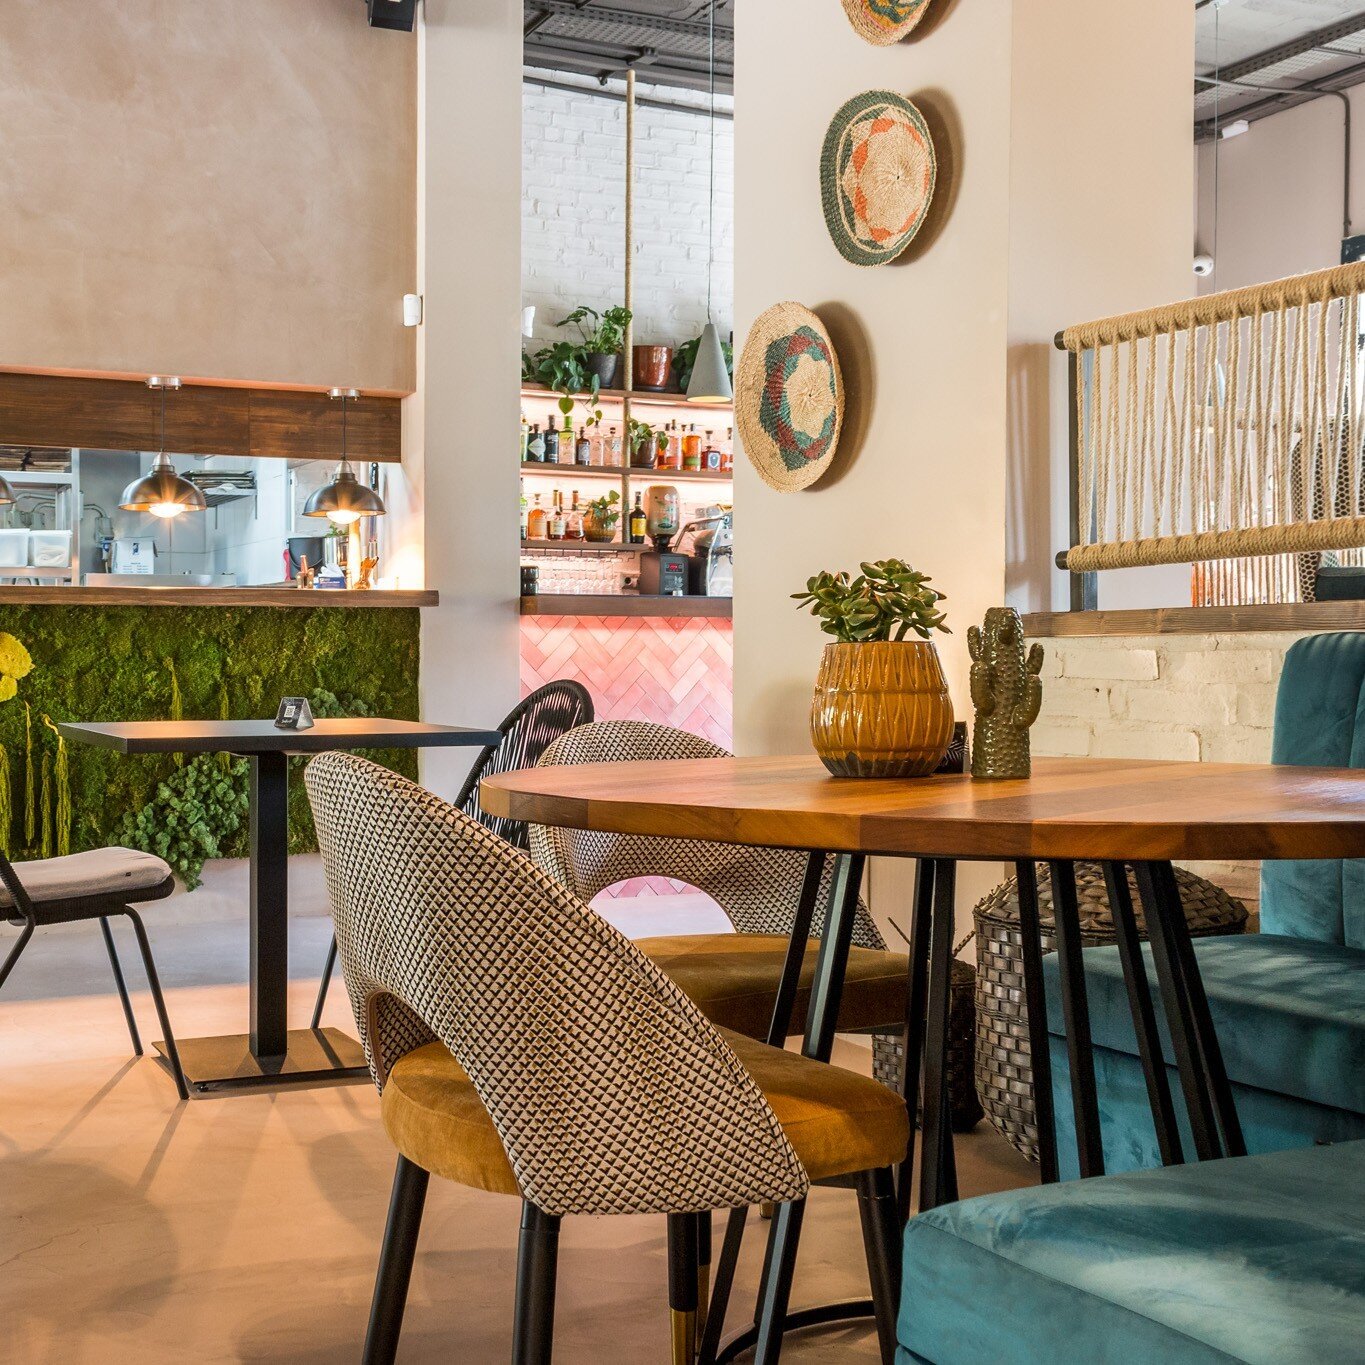 🍹 🍸 From restaurants and bars to hotels and nightclubs, commercial projects are a chance to look at how style and function can be fused together 🧬

We take this opportunity to create innovative ideas that enhance the purpose of your space whilst r